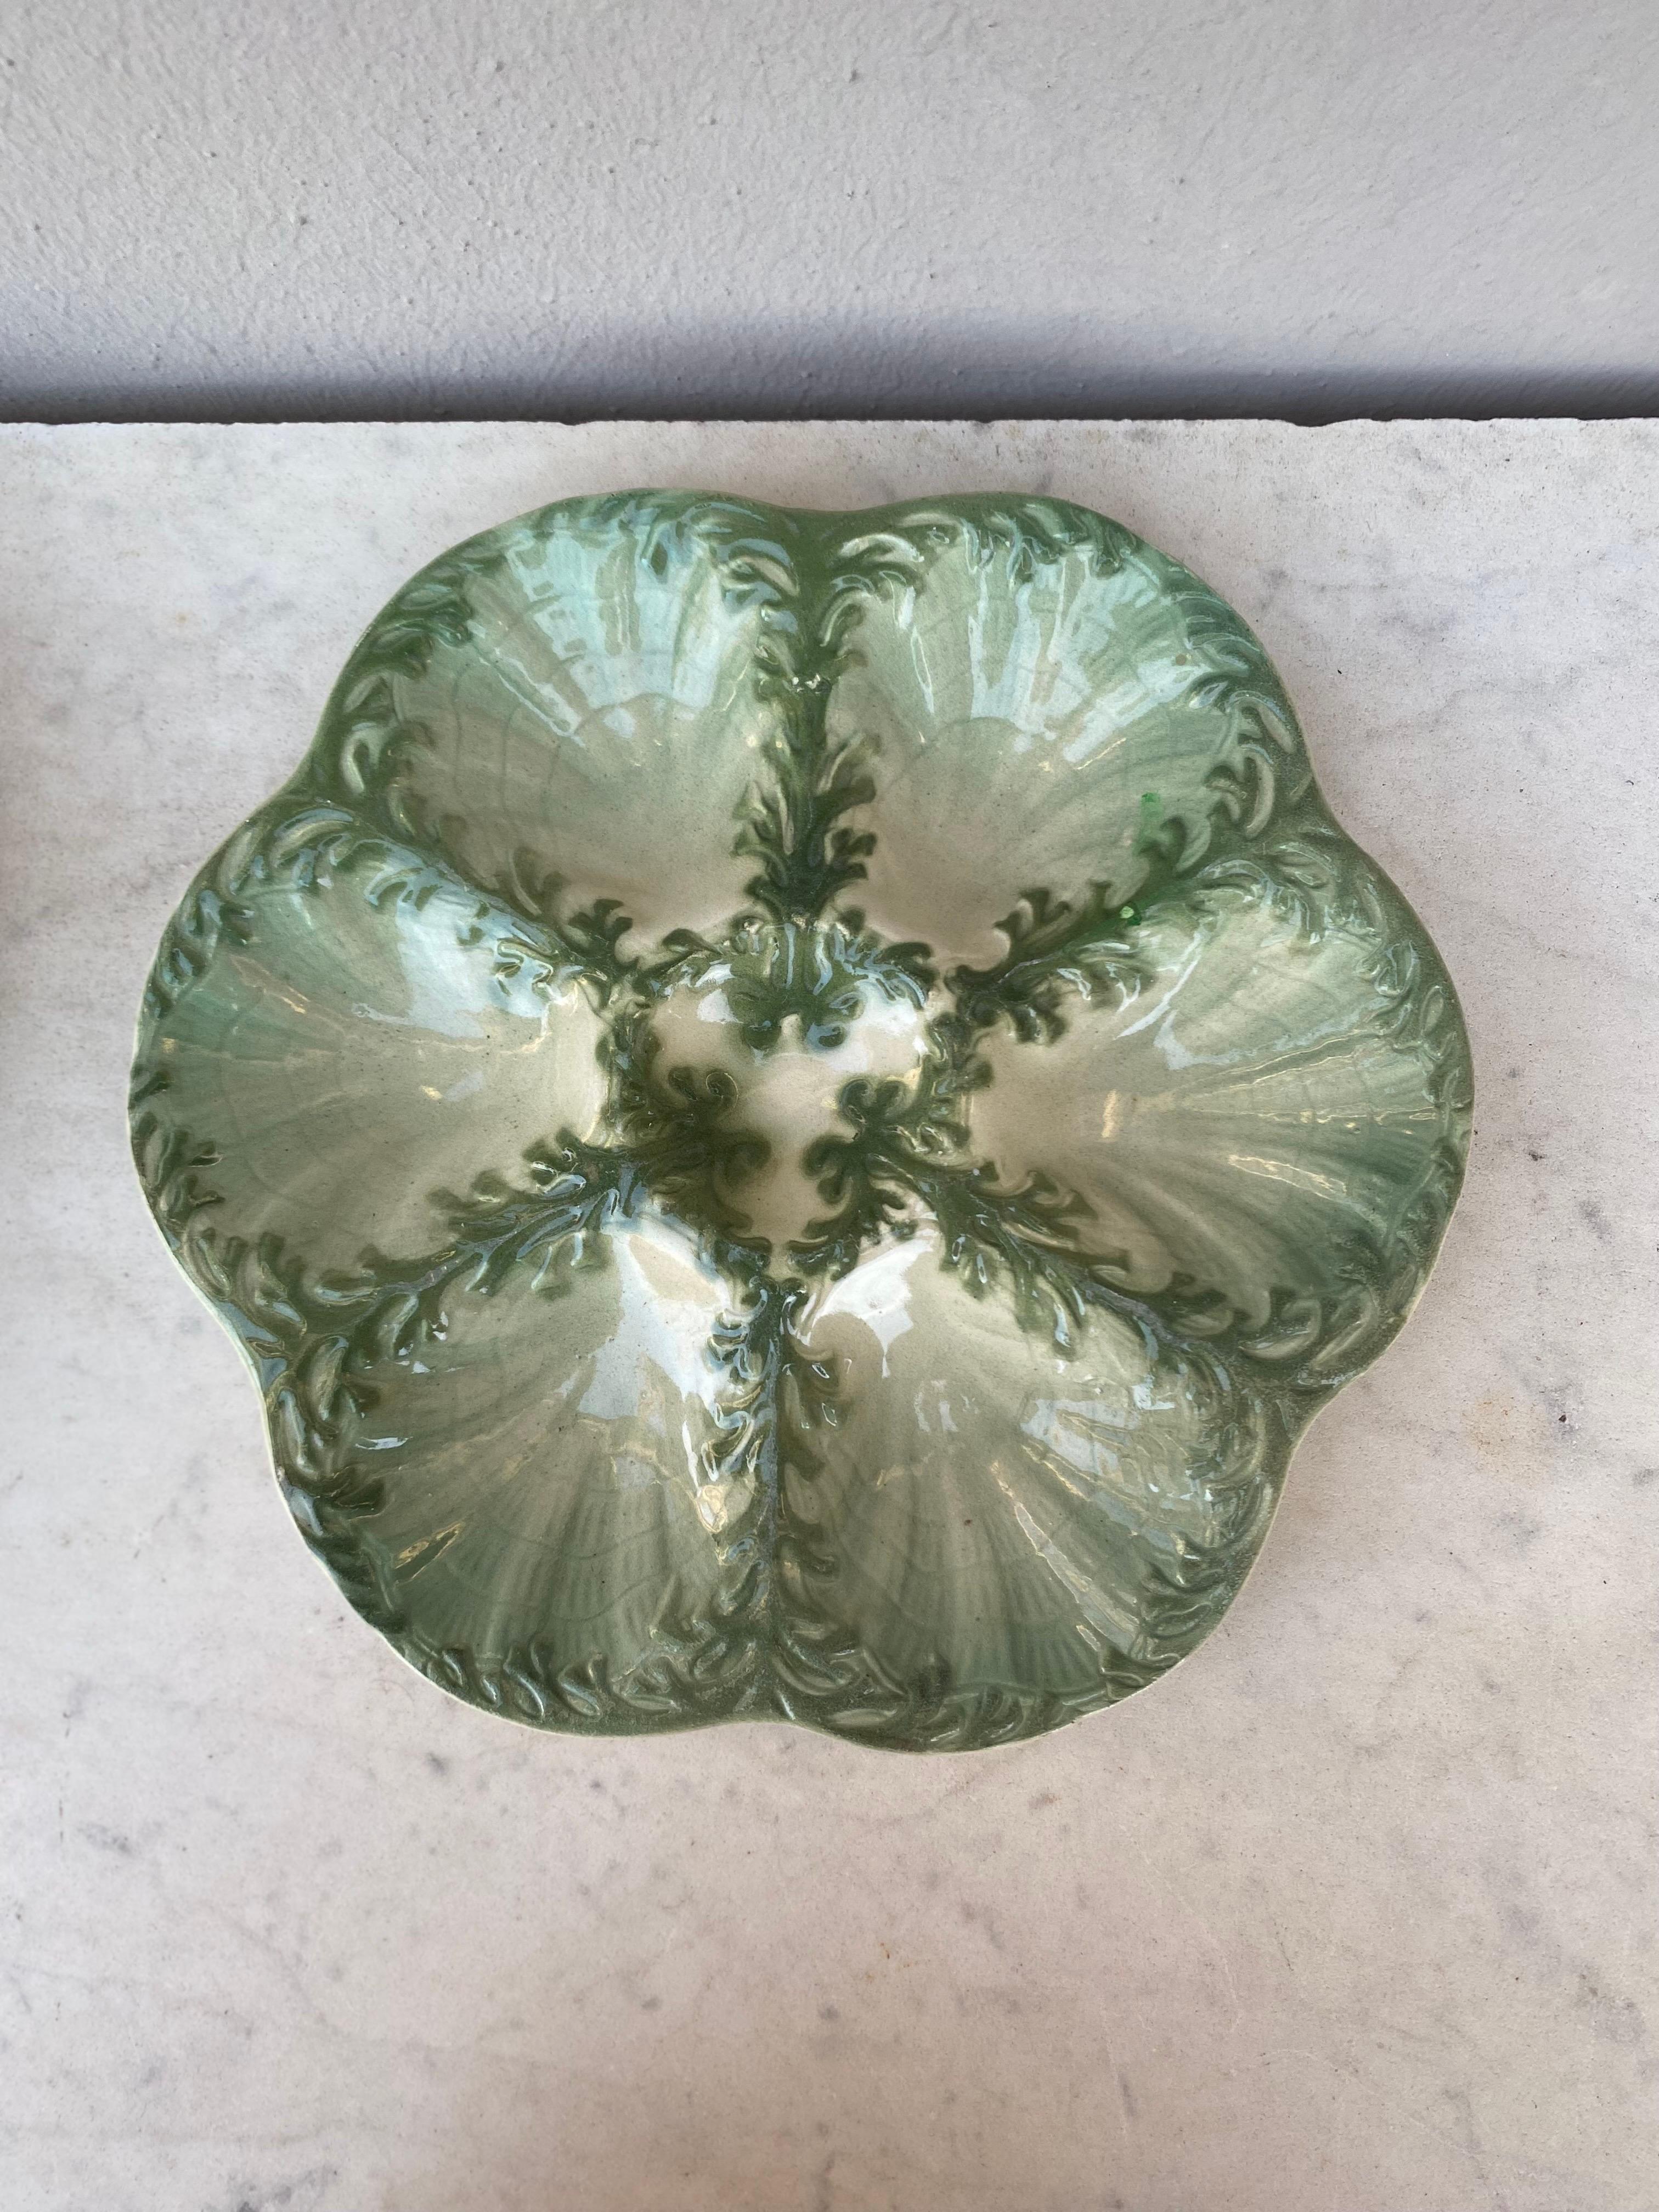 Majolica oyster plate Keller et Guerin Saint Clement, circa 1900.
Usually in pink, rare color.
Reference / Page 98 